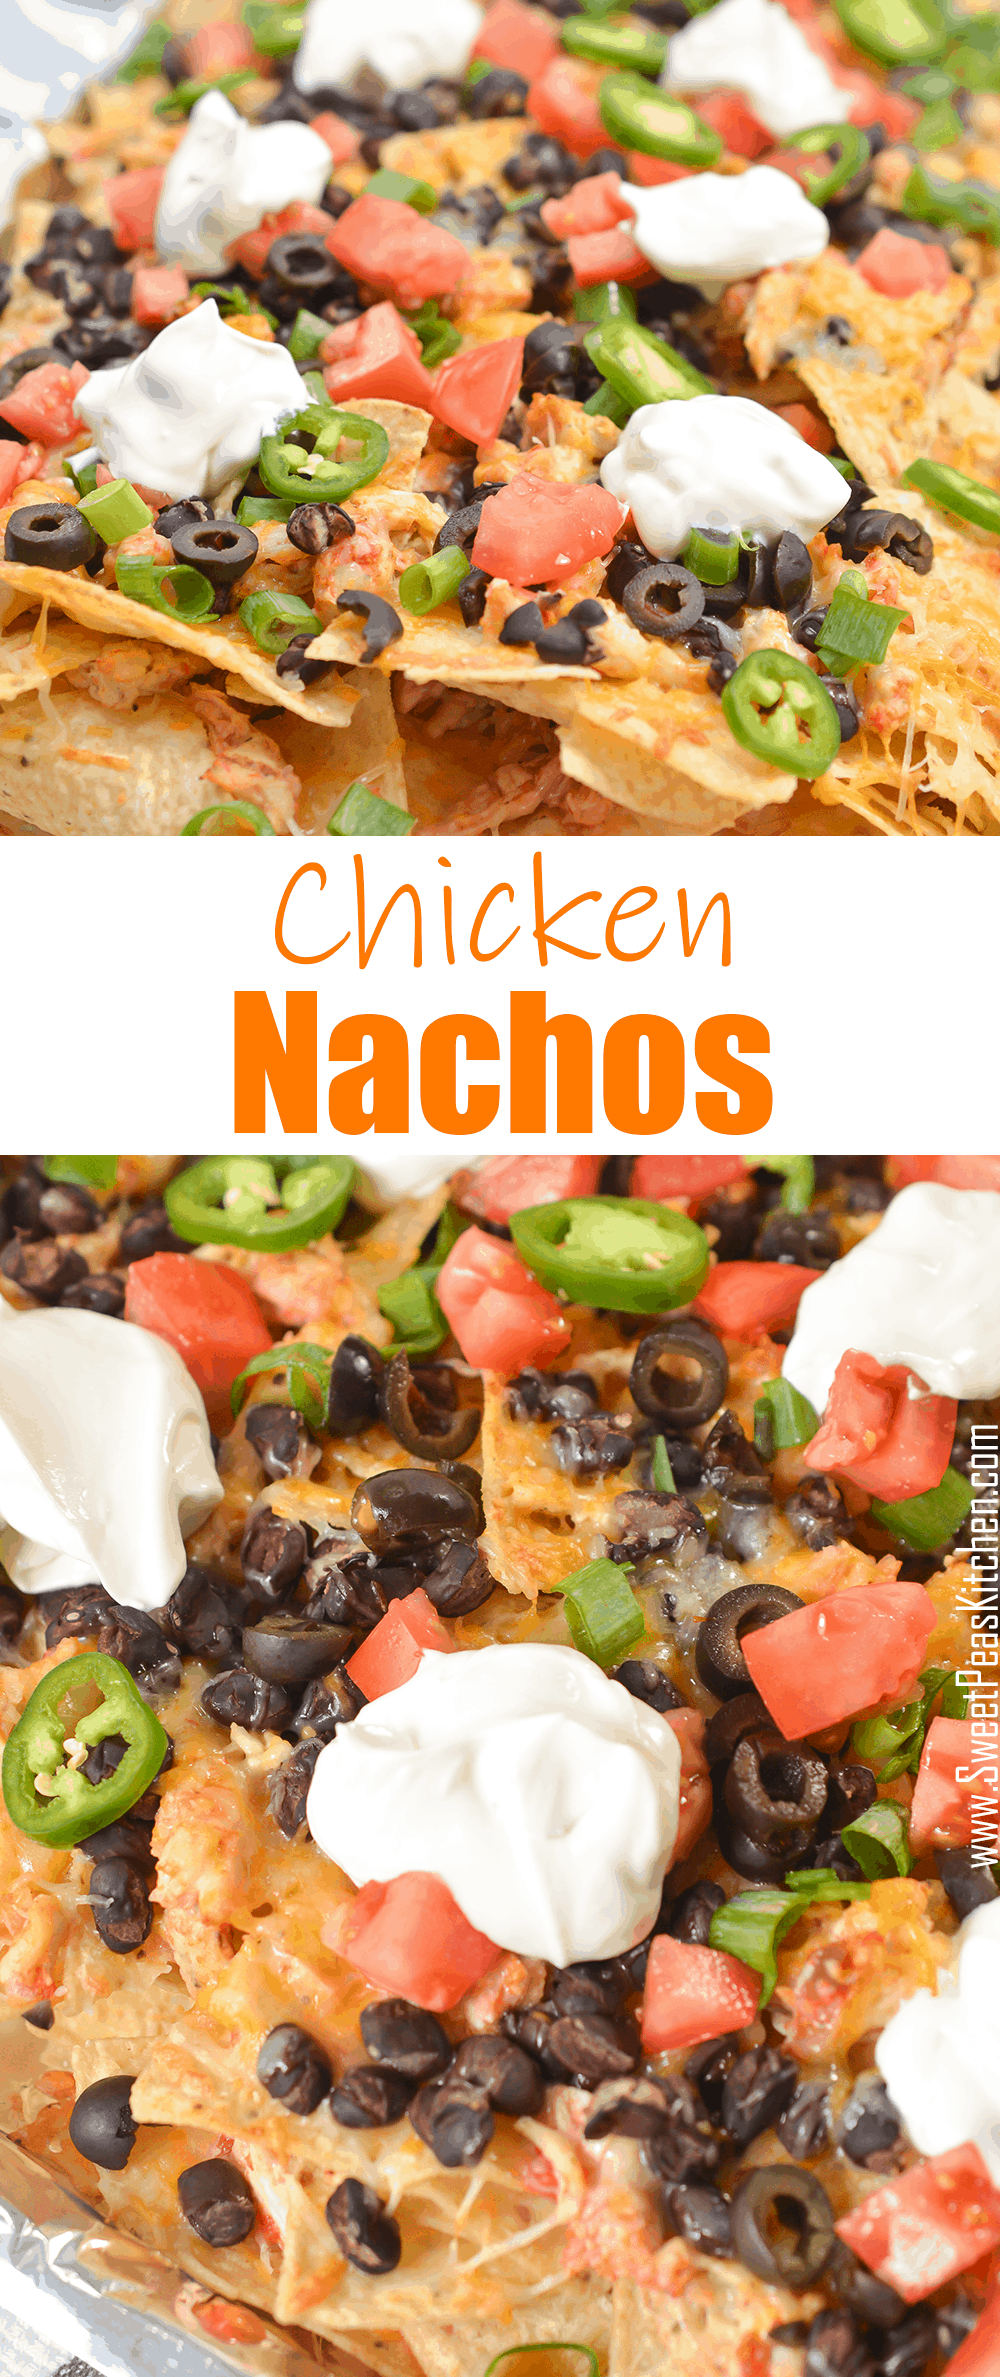 Less than 30 Minutes Chicken Nachos with salsa, black beans and cheese.